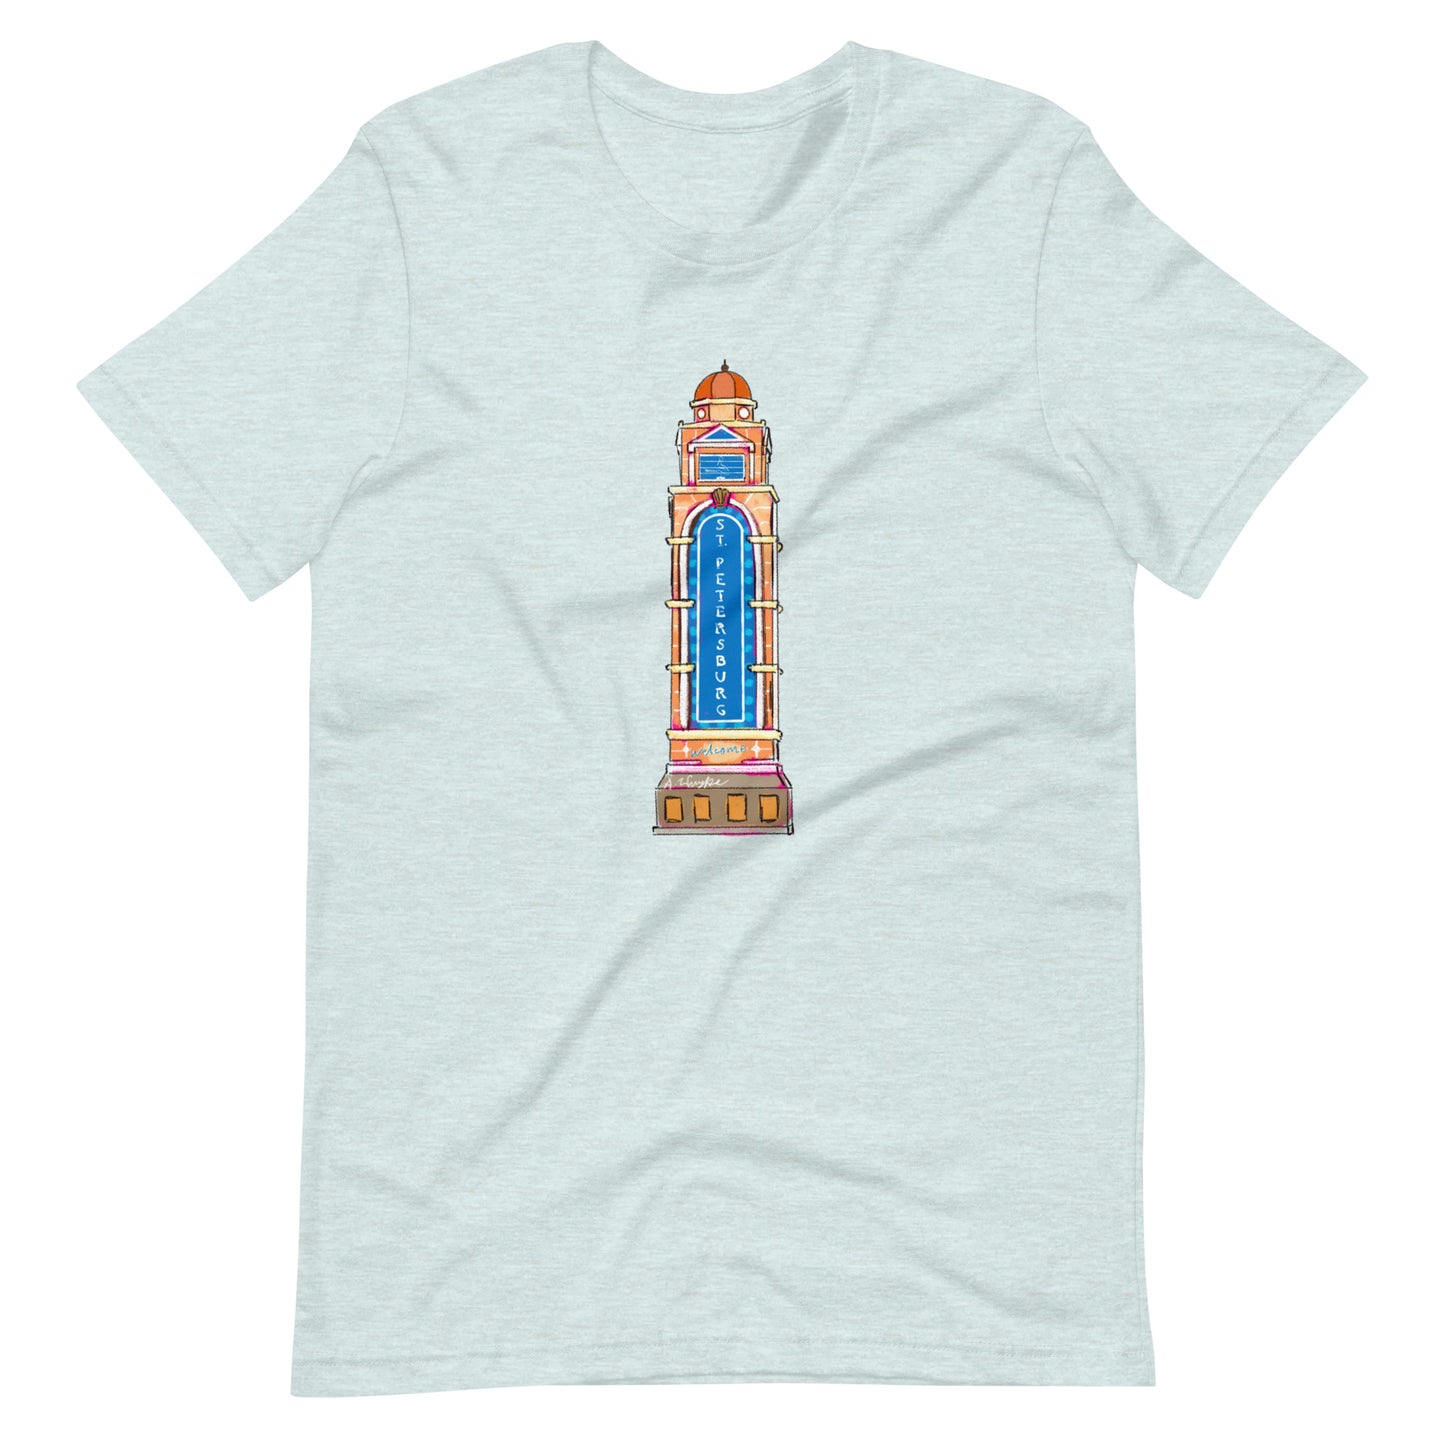 "Welcome to St. Pete" Tee